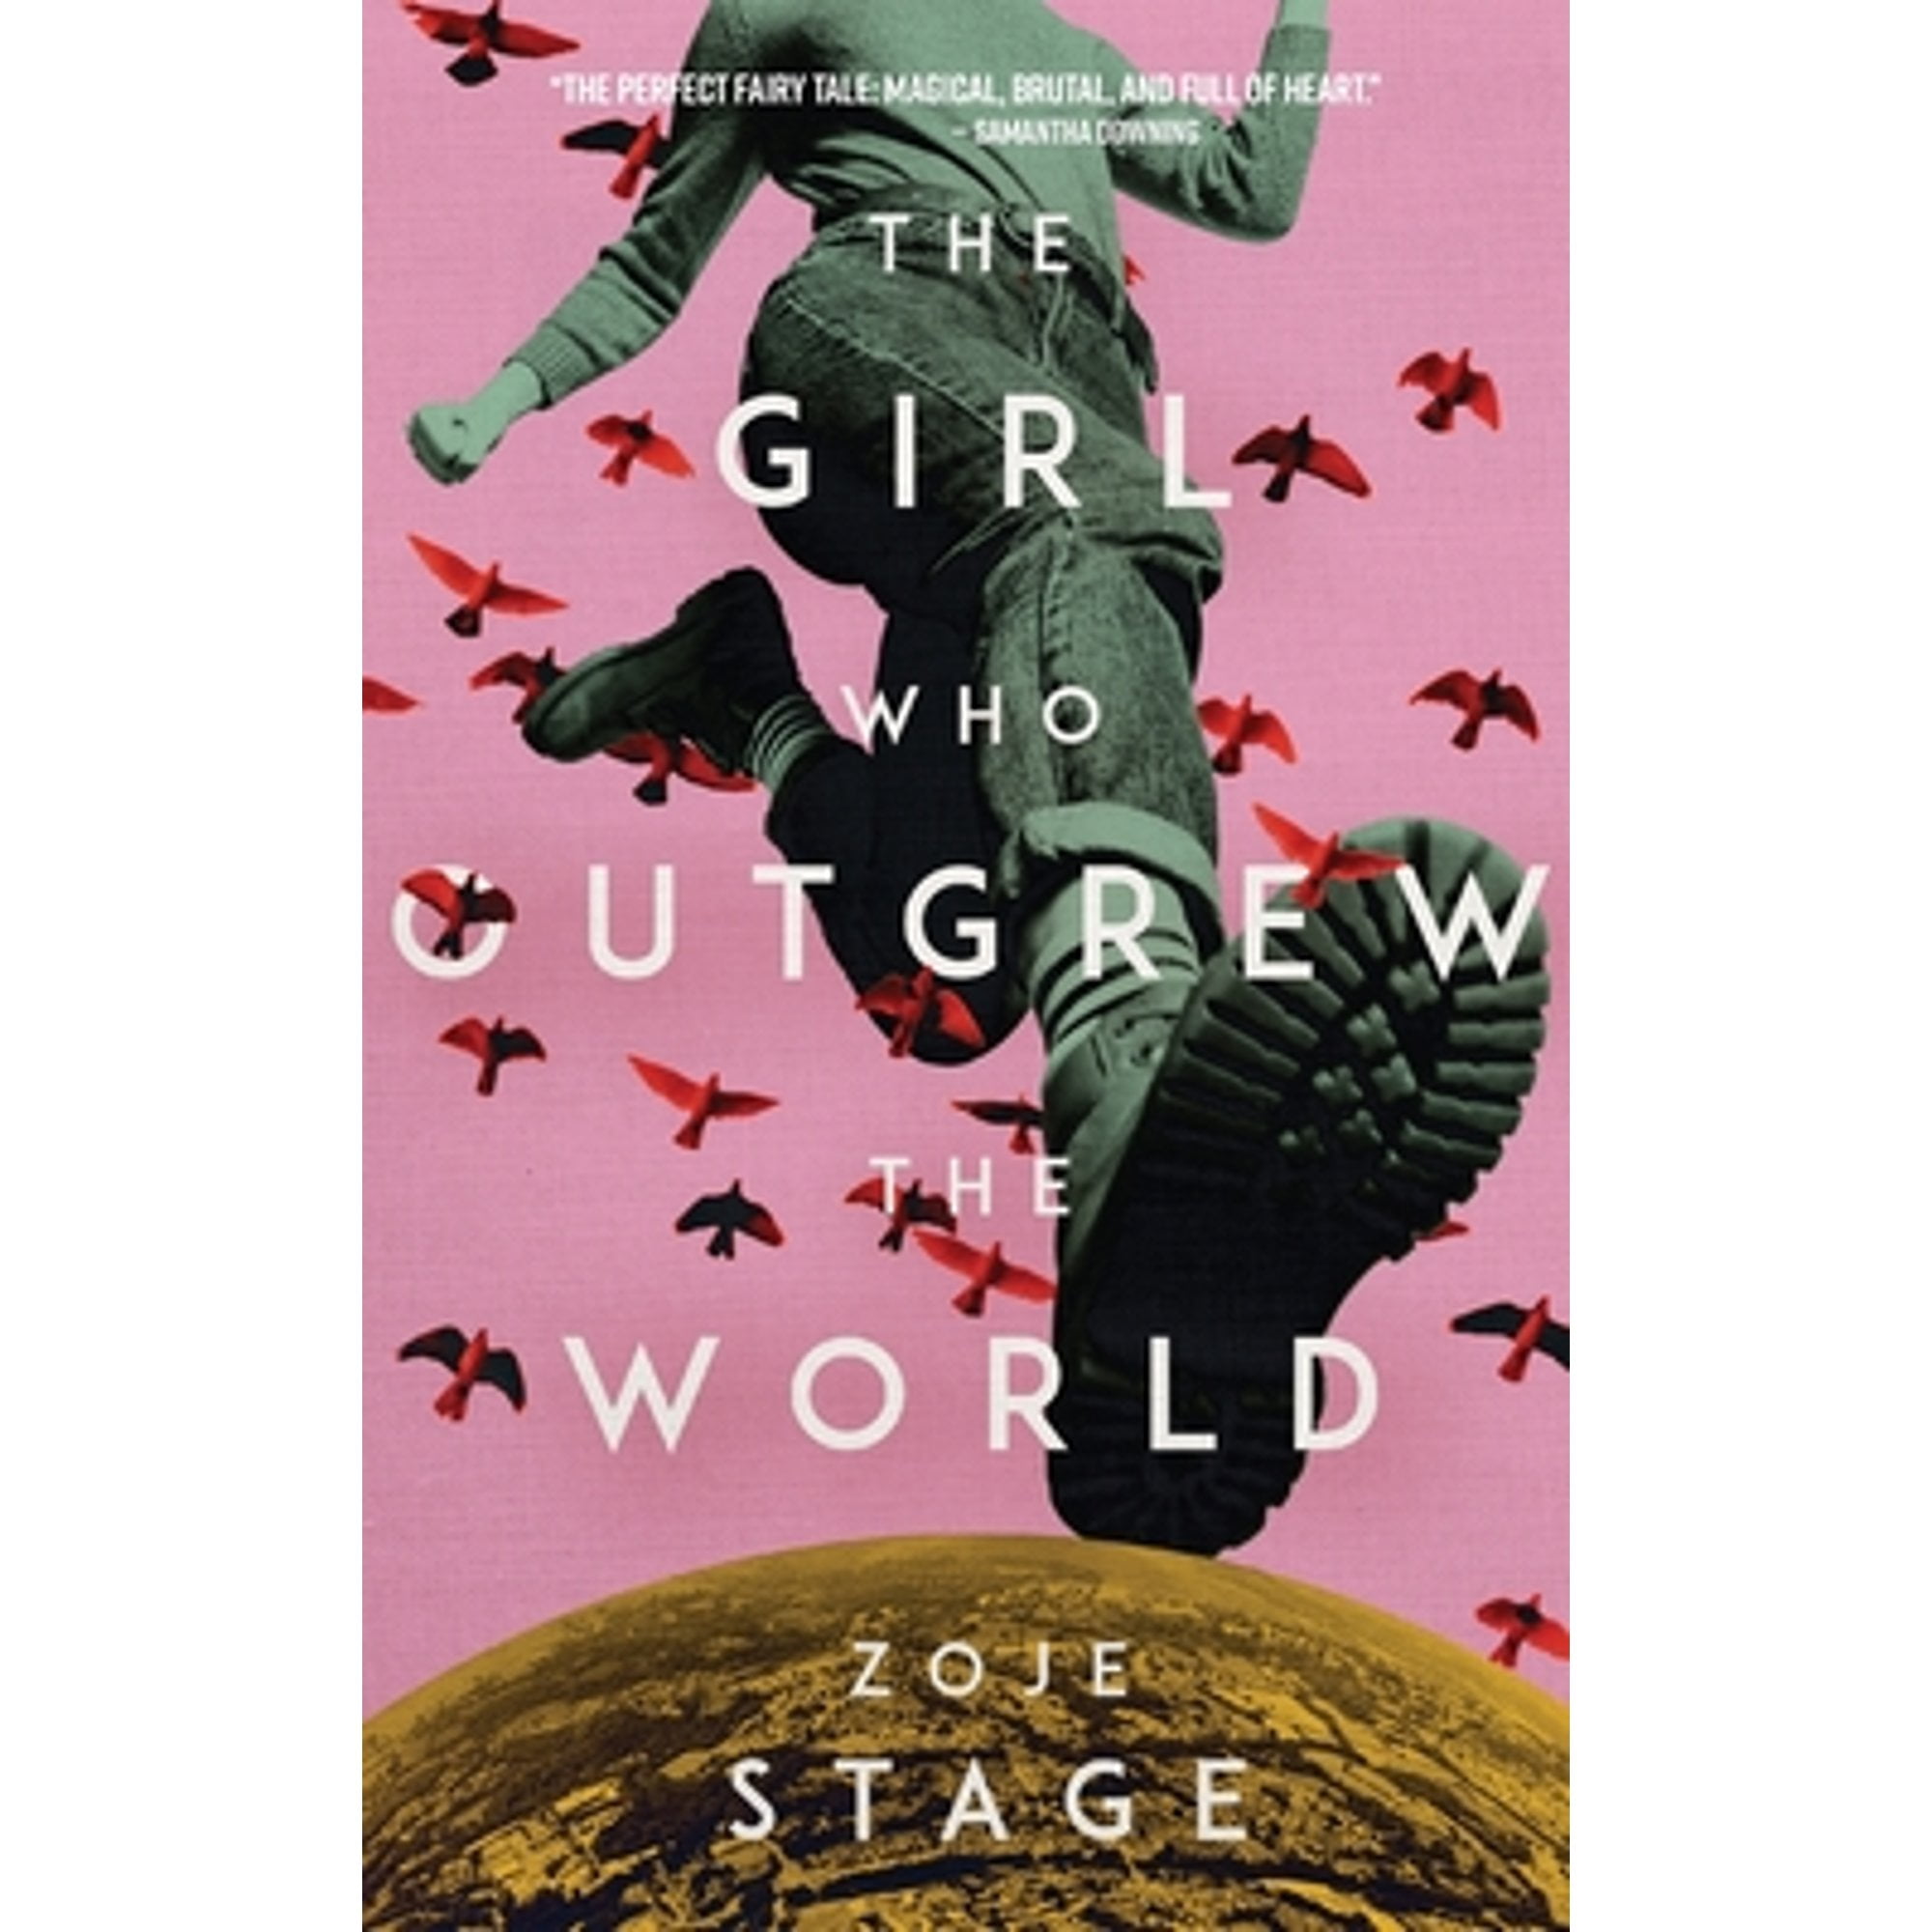 Pre-Owned The Girl Who Outgrew the World (Paperback) by Zoje Stage